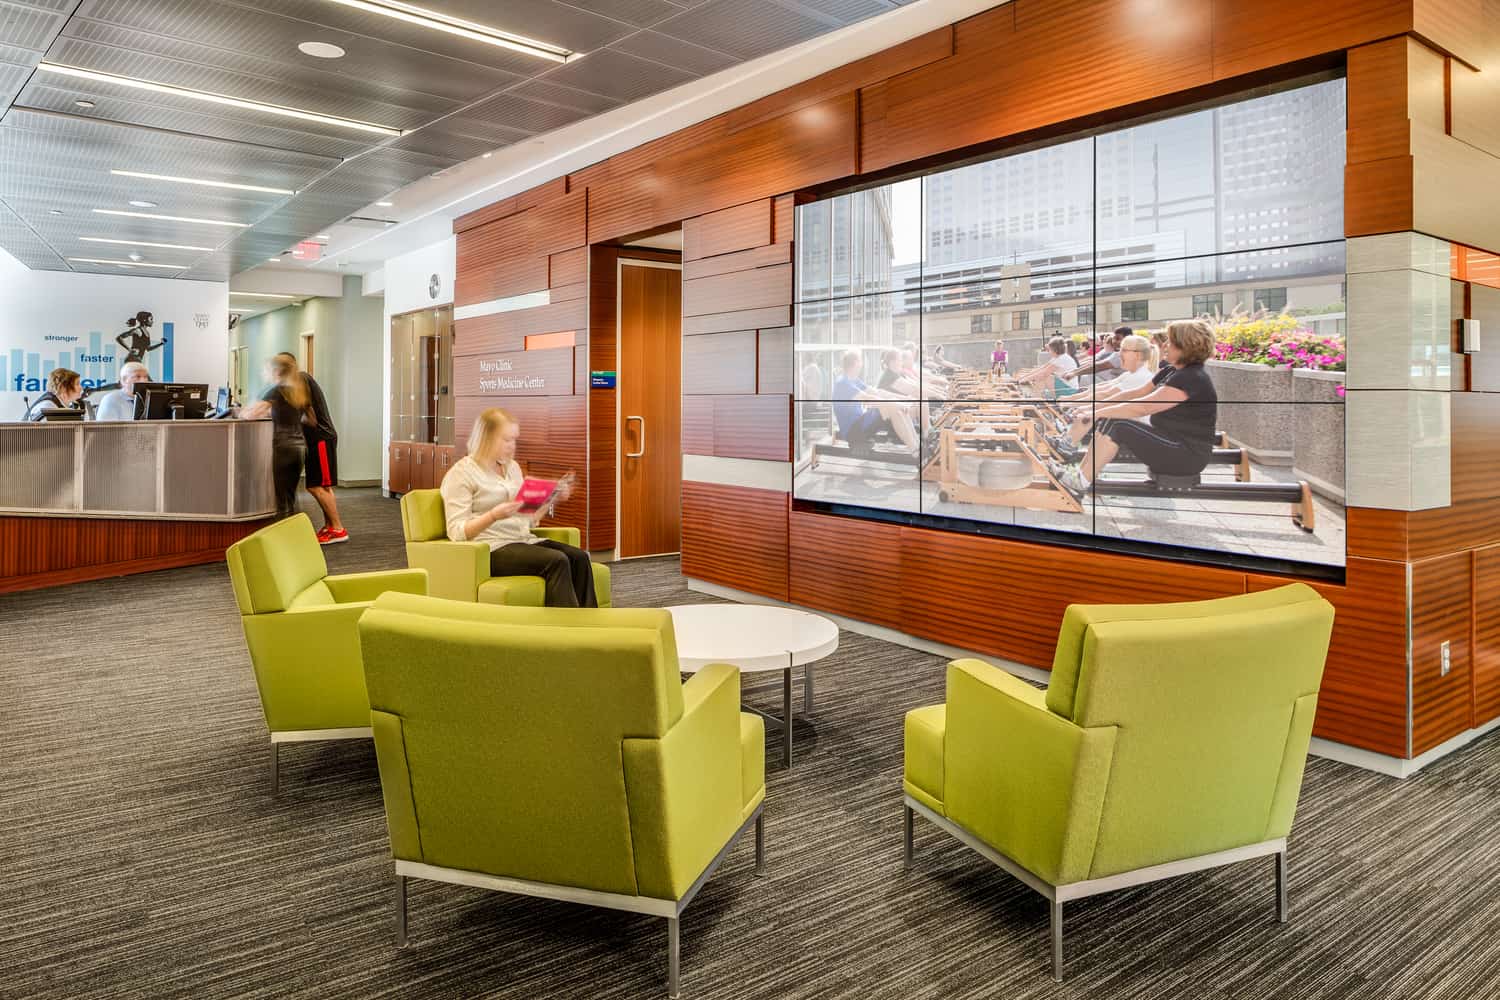 Mayo Clinic Sports Medicine Center Honored  as Top Healthcare Design Project